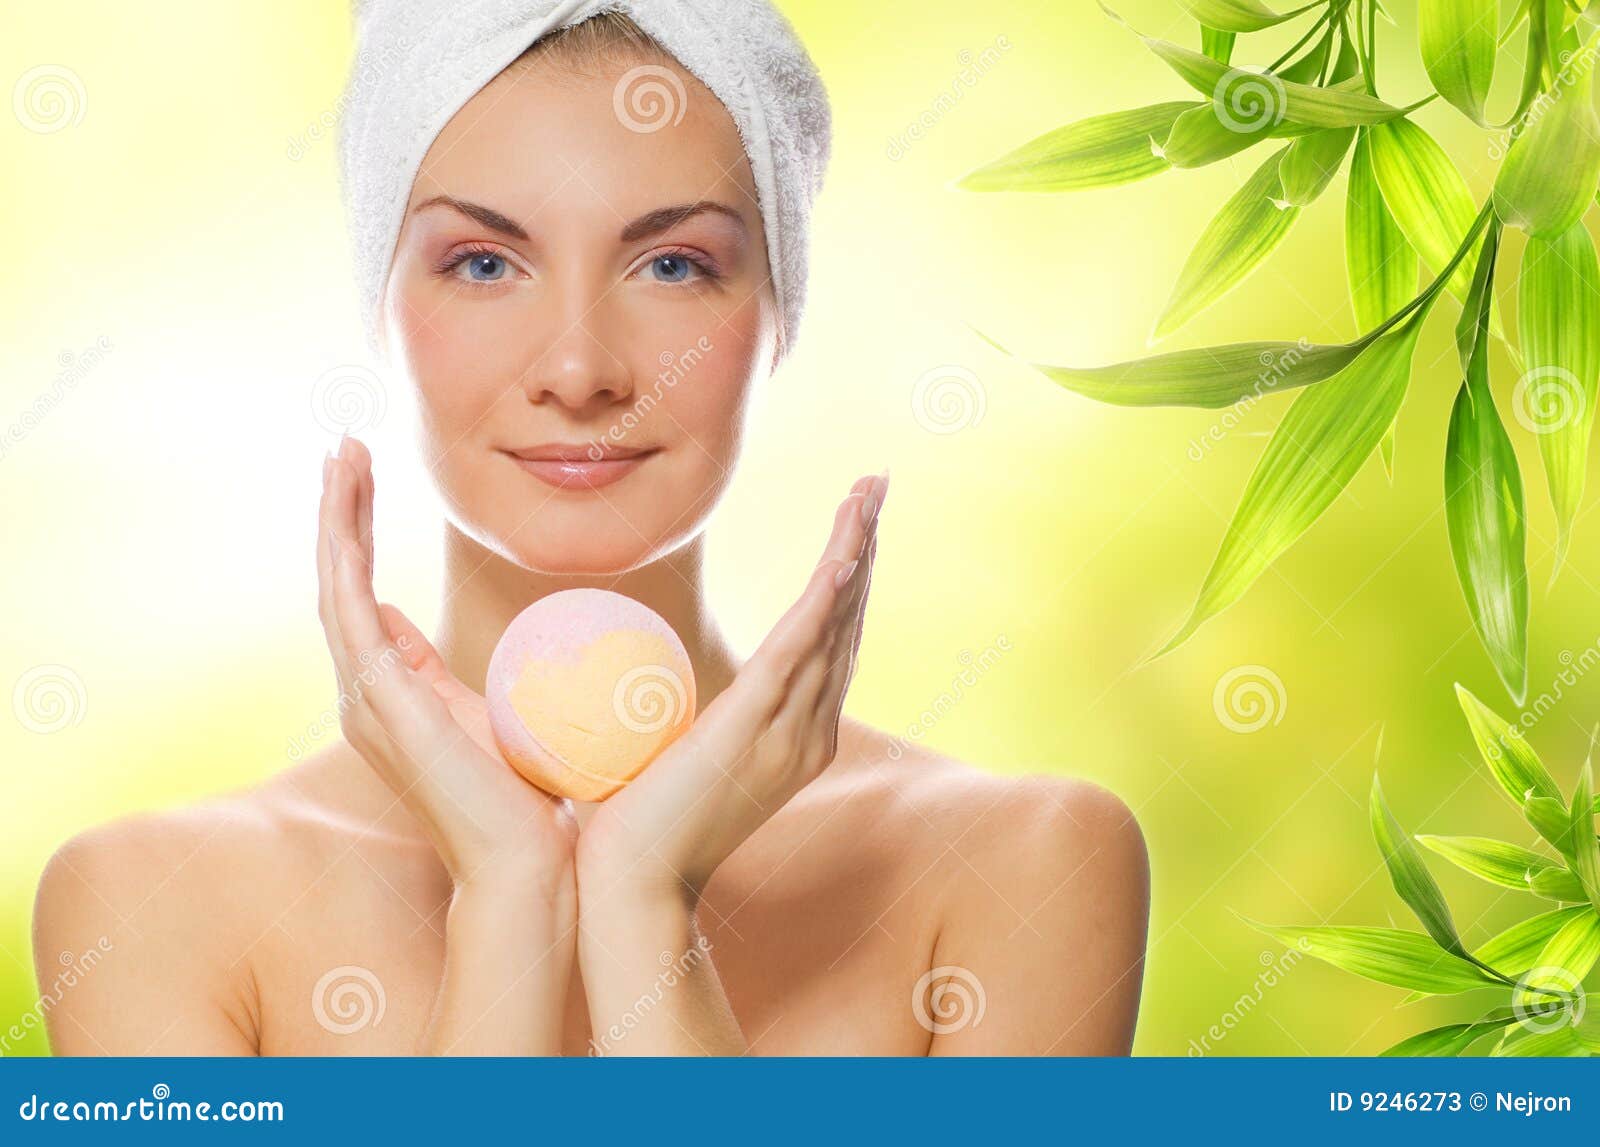 woman with aroma soap